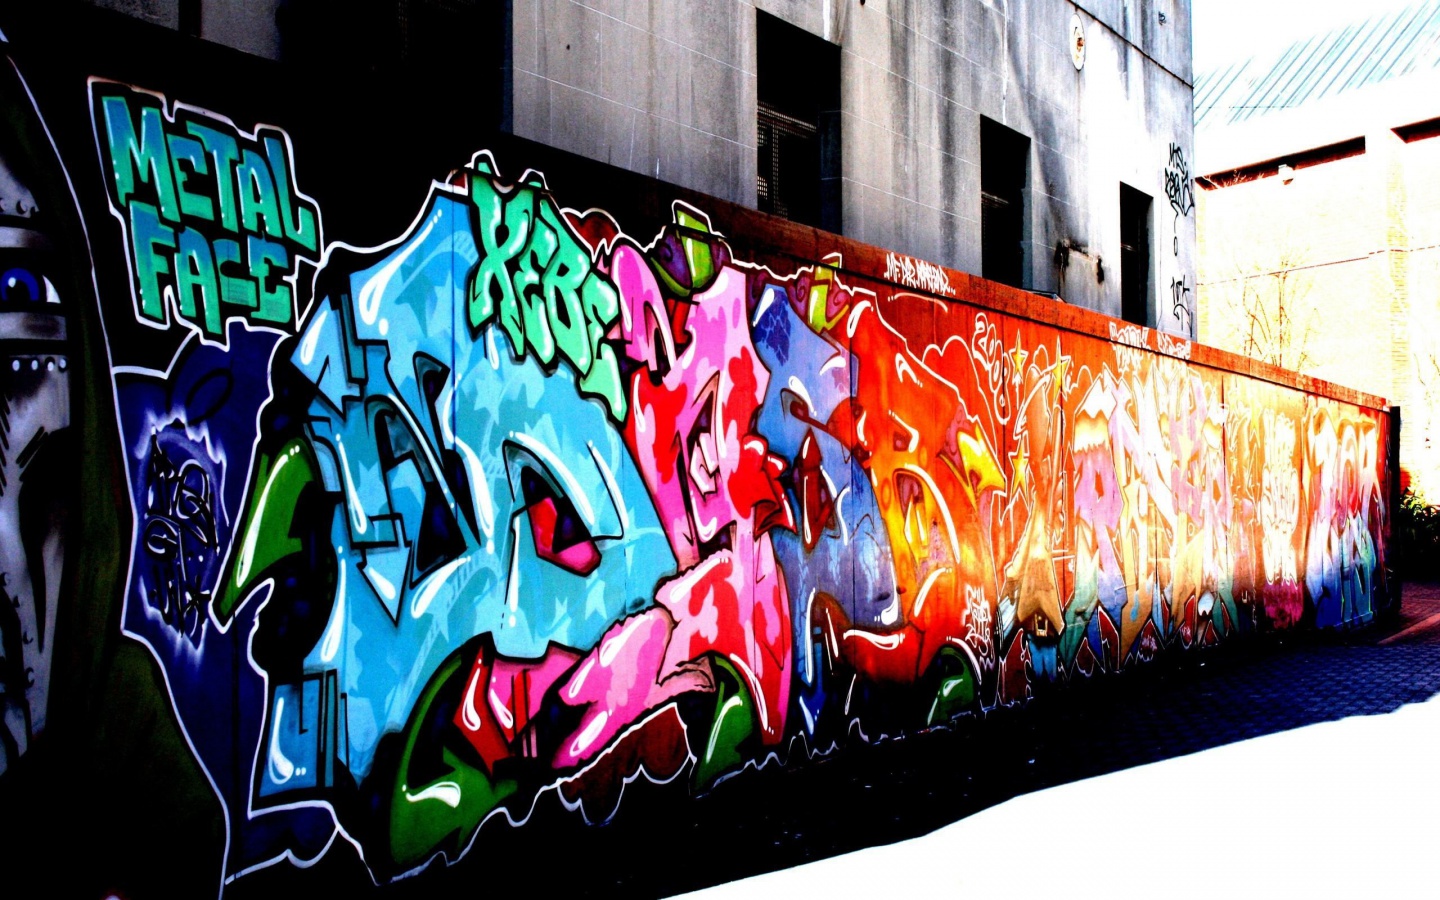 Comment To Download Free Graffiti Wallpaper Images For Laptop ...